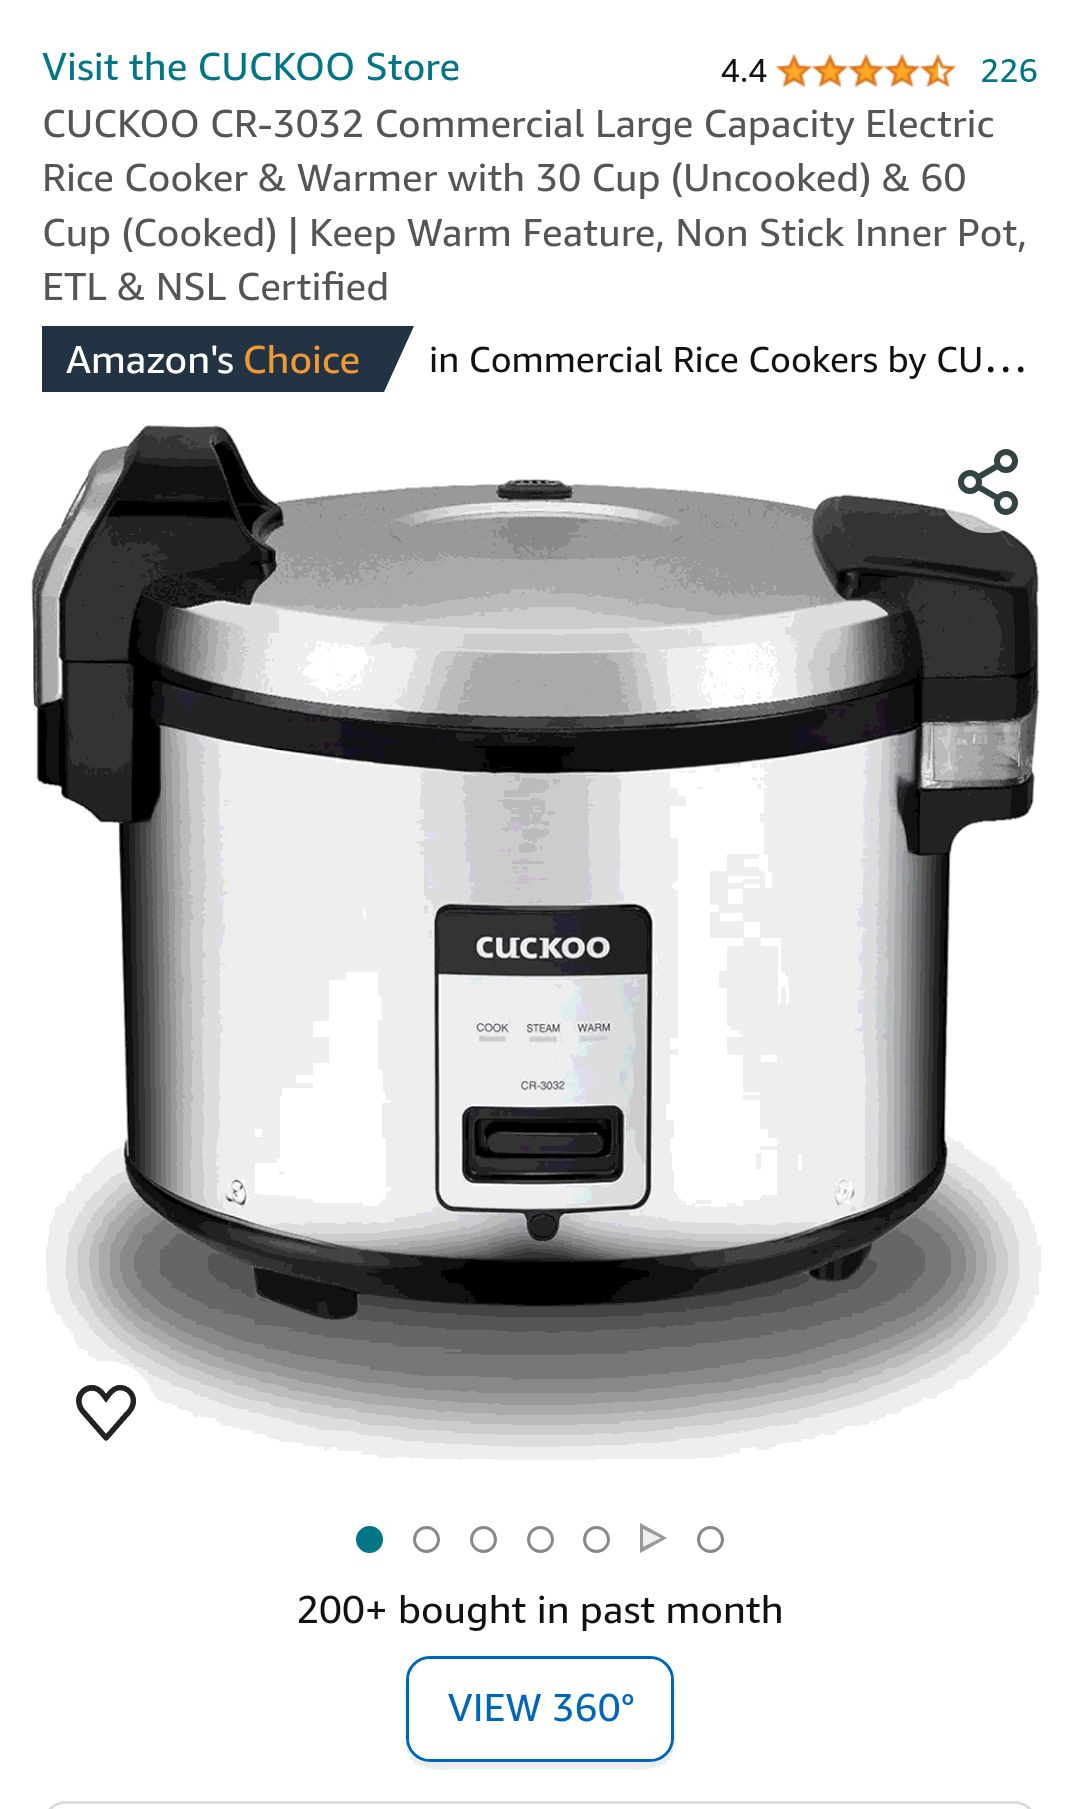 CUCKOO CR-3032 Commercial Large Capacity Electric Rice Cooker & Warmer with 30 Cup (Uncooked) & 60 Cup (Cooked) | Keep Warm Feature, Non Stick Inner Pot, ETL & NSL Certified : Industrial & Scientific